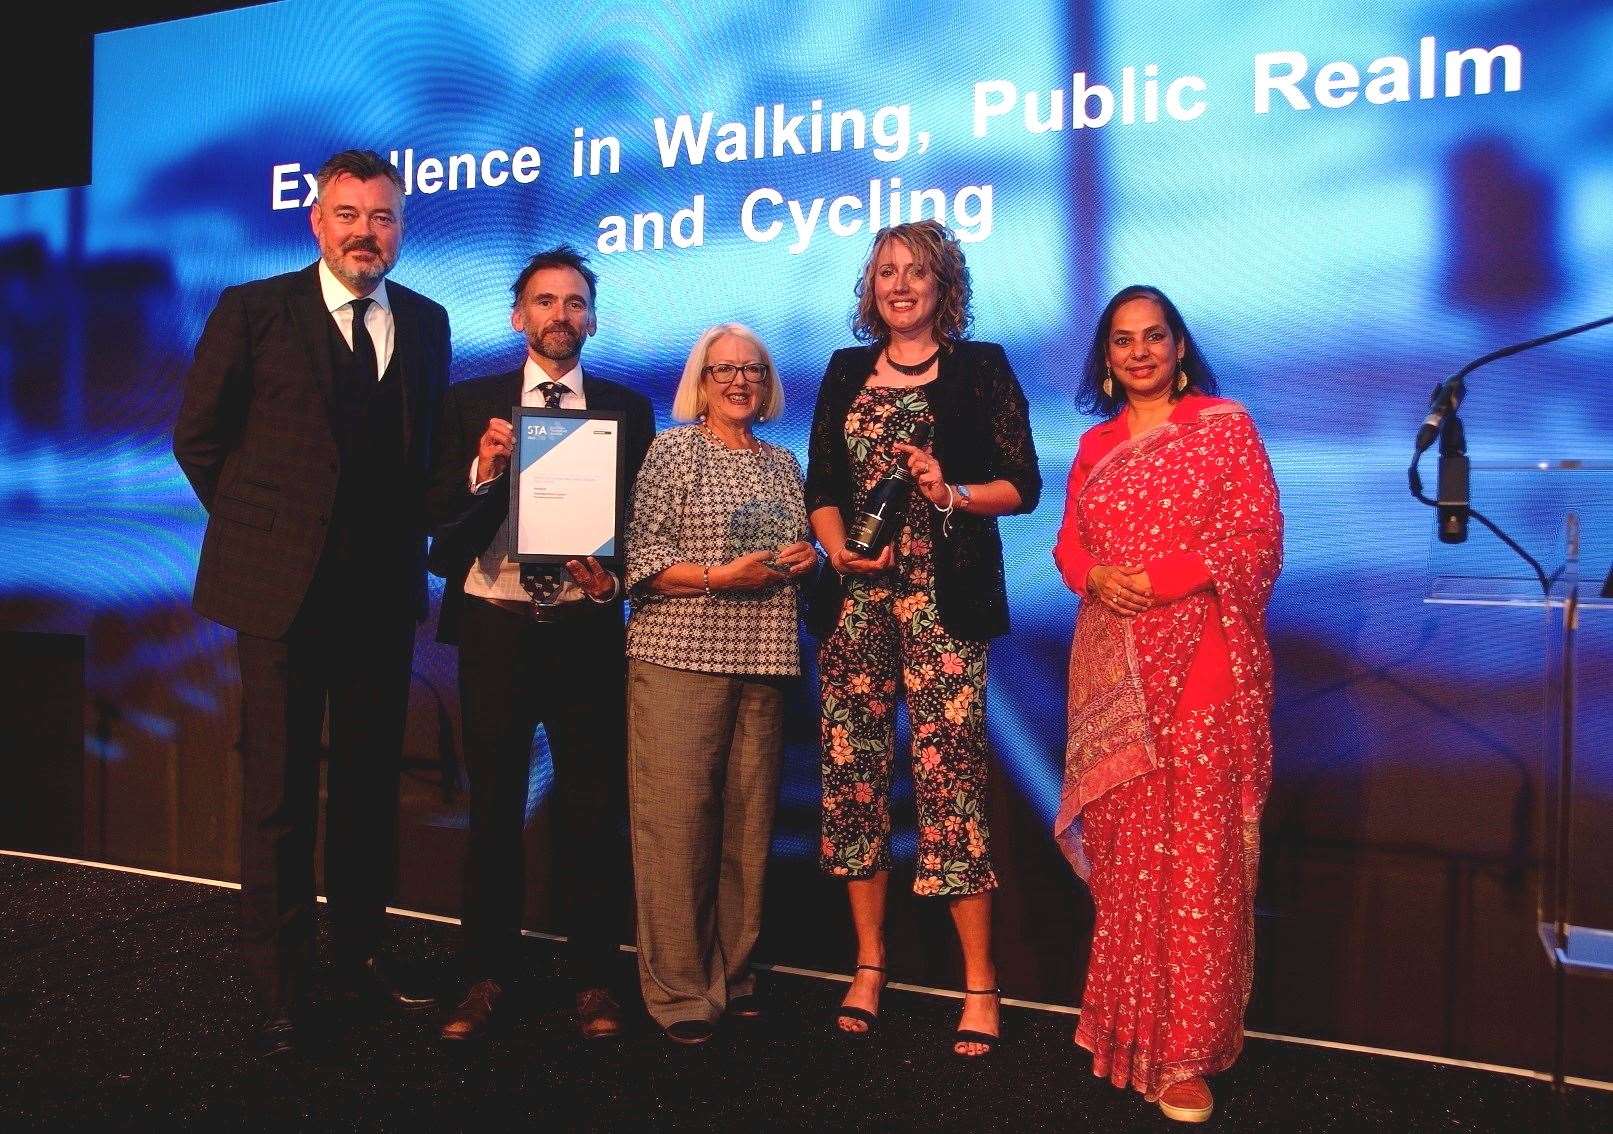 Excellence in Walking/Public Realm Cycling was awarded to Aberdeenshire Council